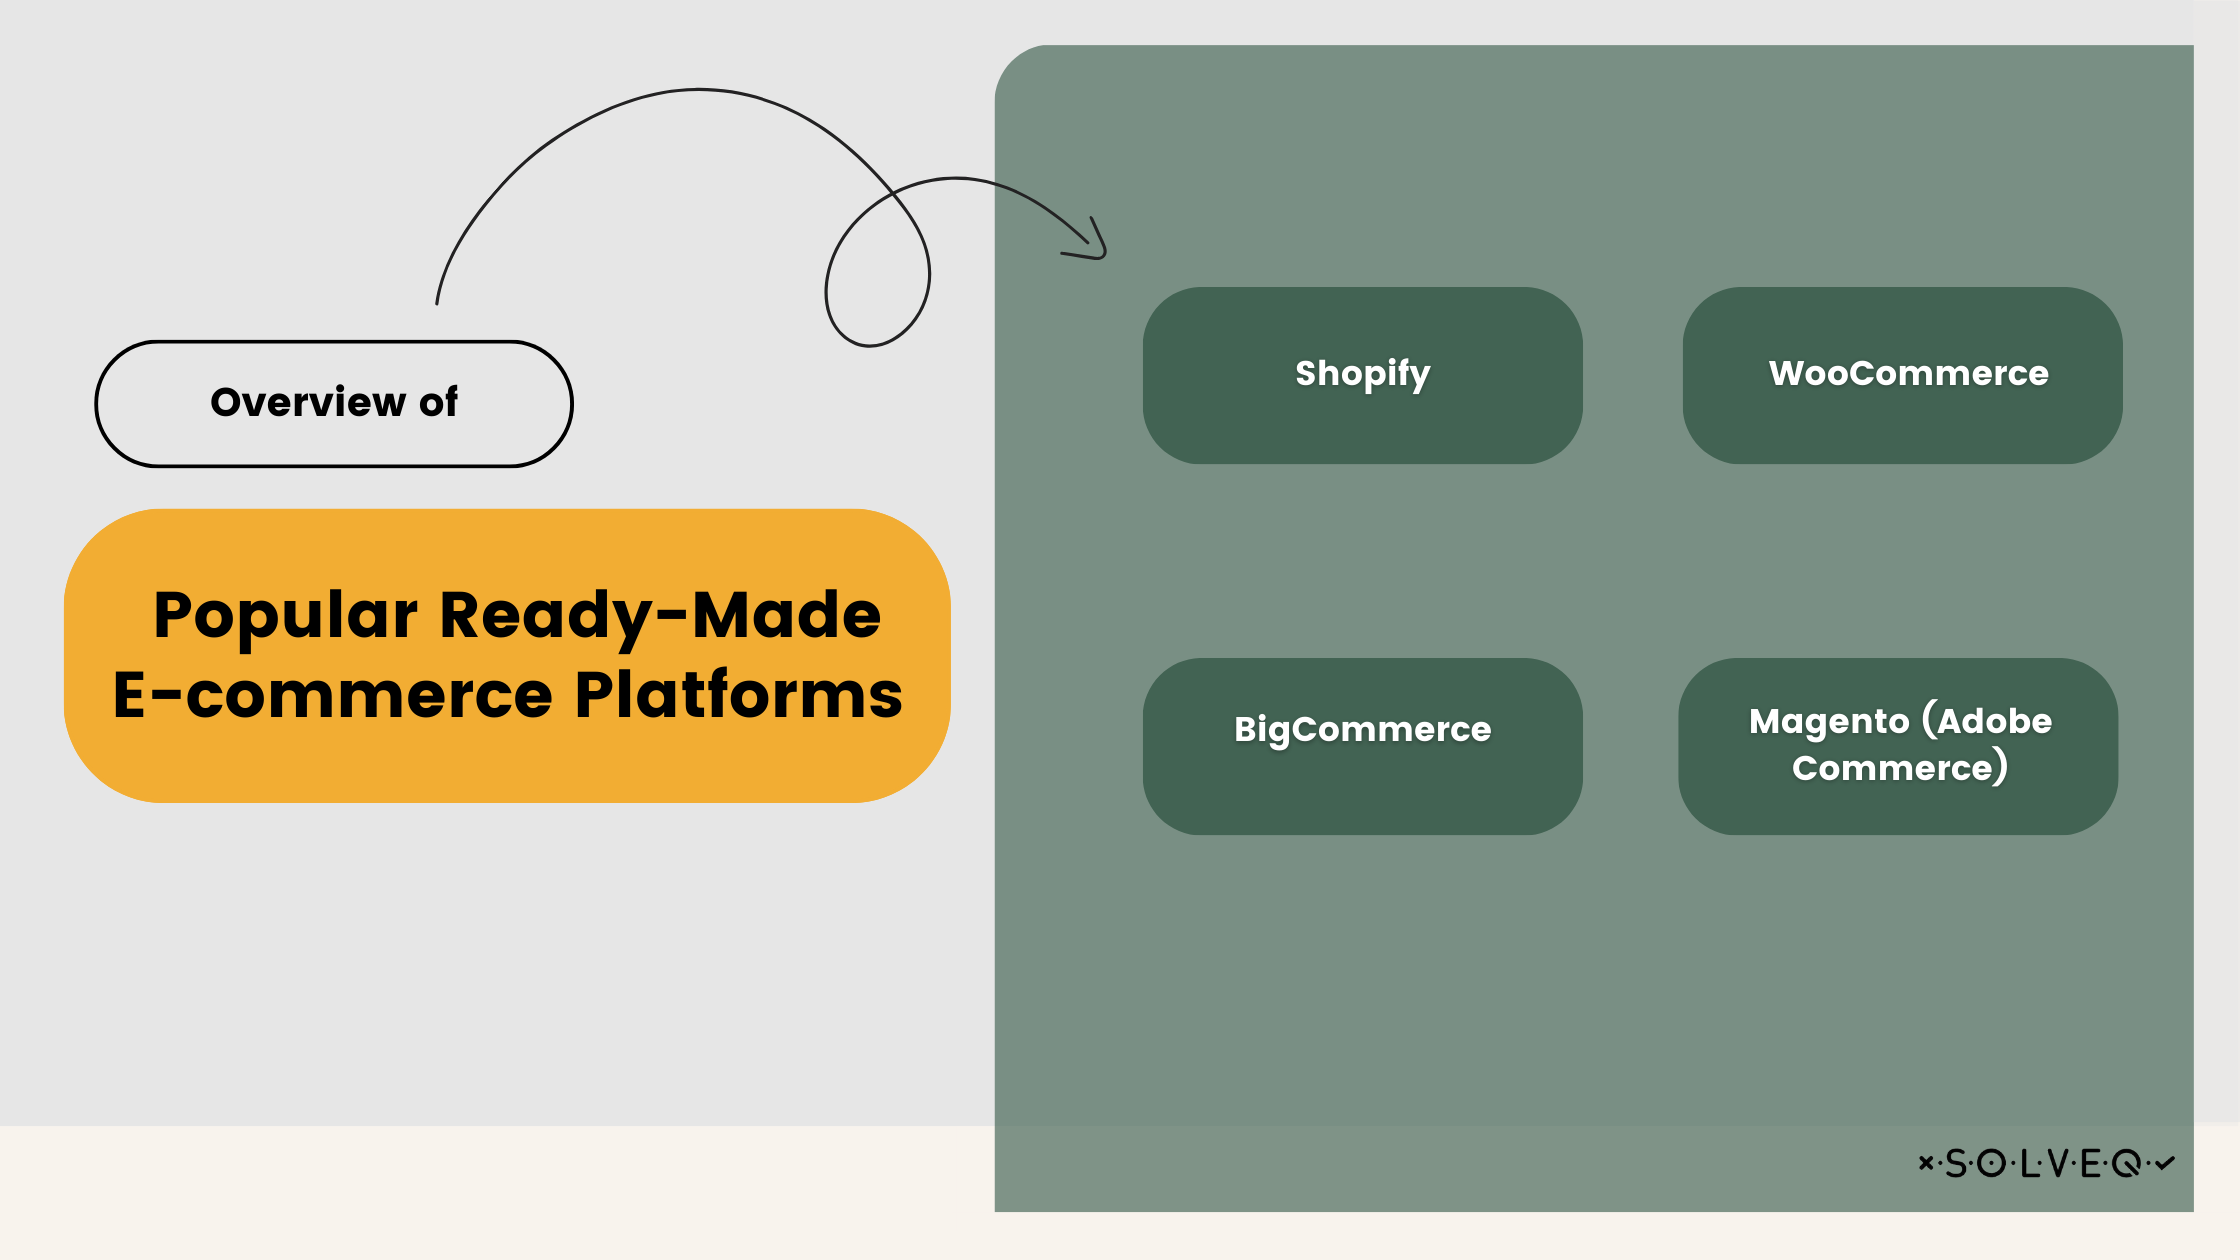 Overview of Popular Ready-Made E-commerce Platforms